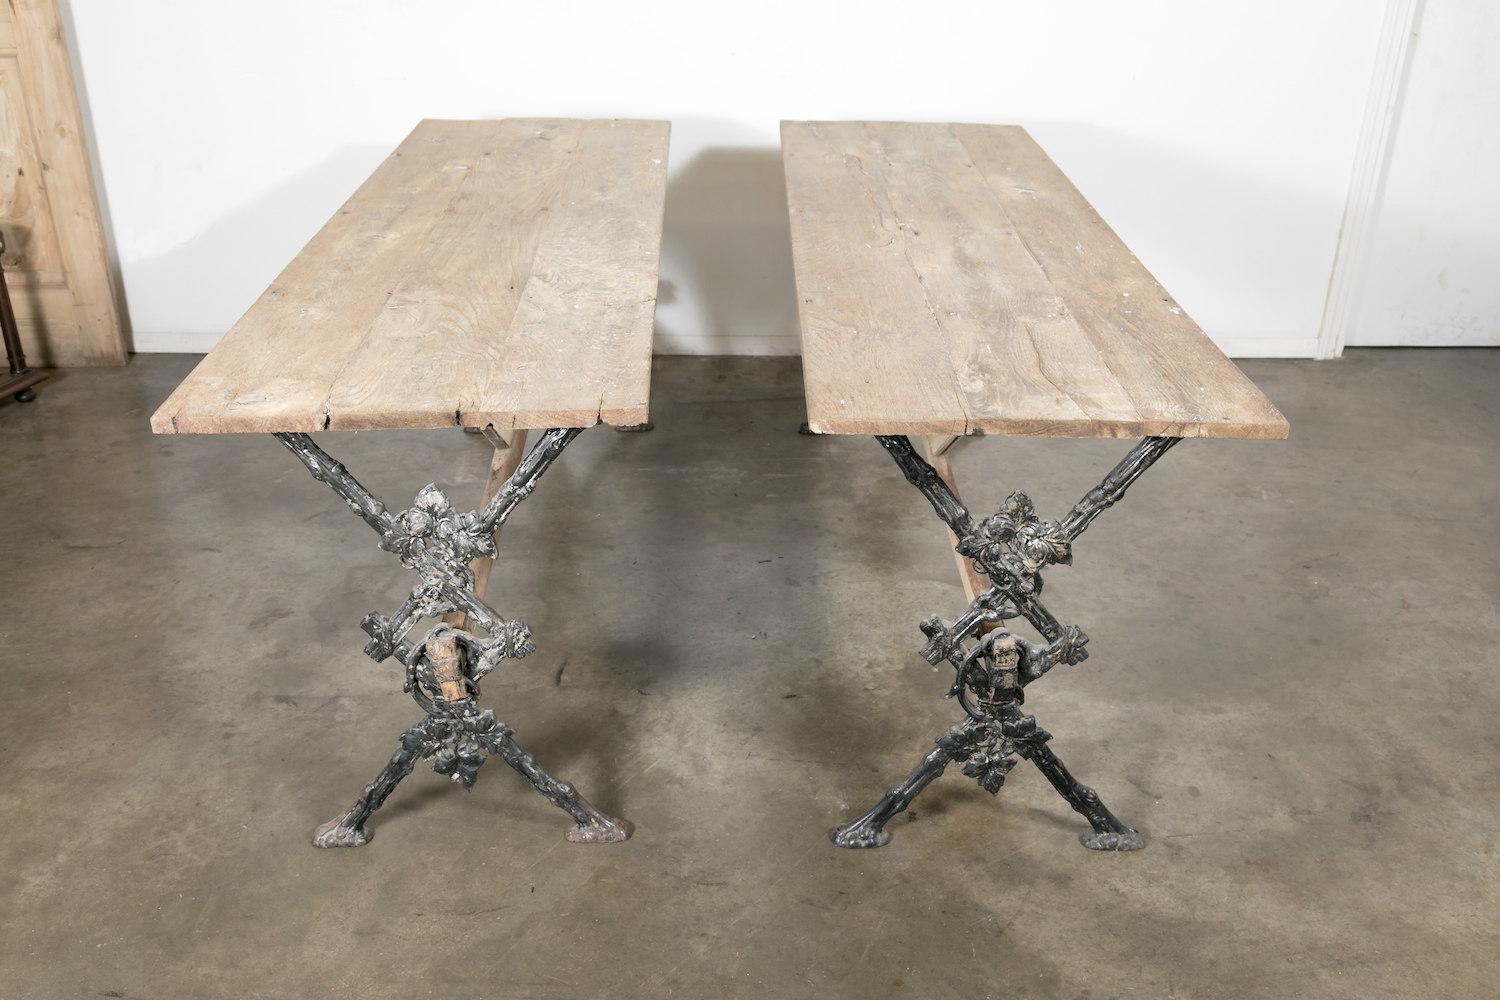 Charming early 20th century bistro table from Bordeaux, having a rustic washed oak top and cast iron legs with exceptional detail featuring fabulous grapevine and leaf decoration, joined by a wooden stretcher that provides additional stability. This